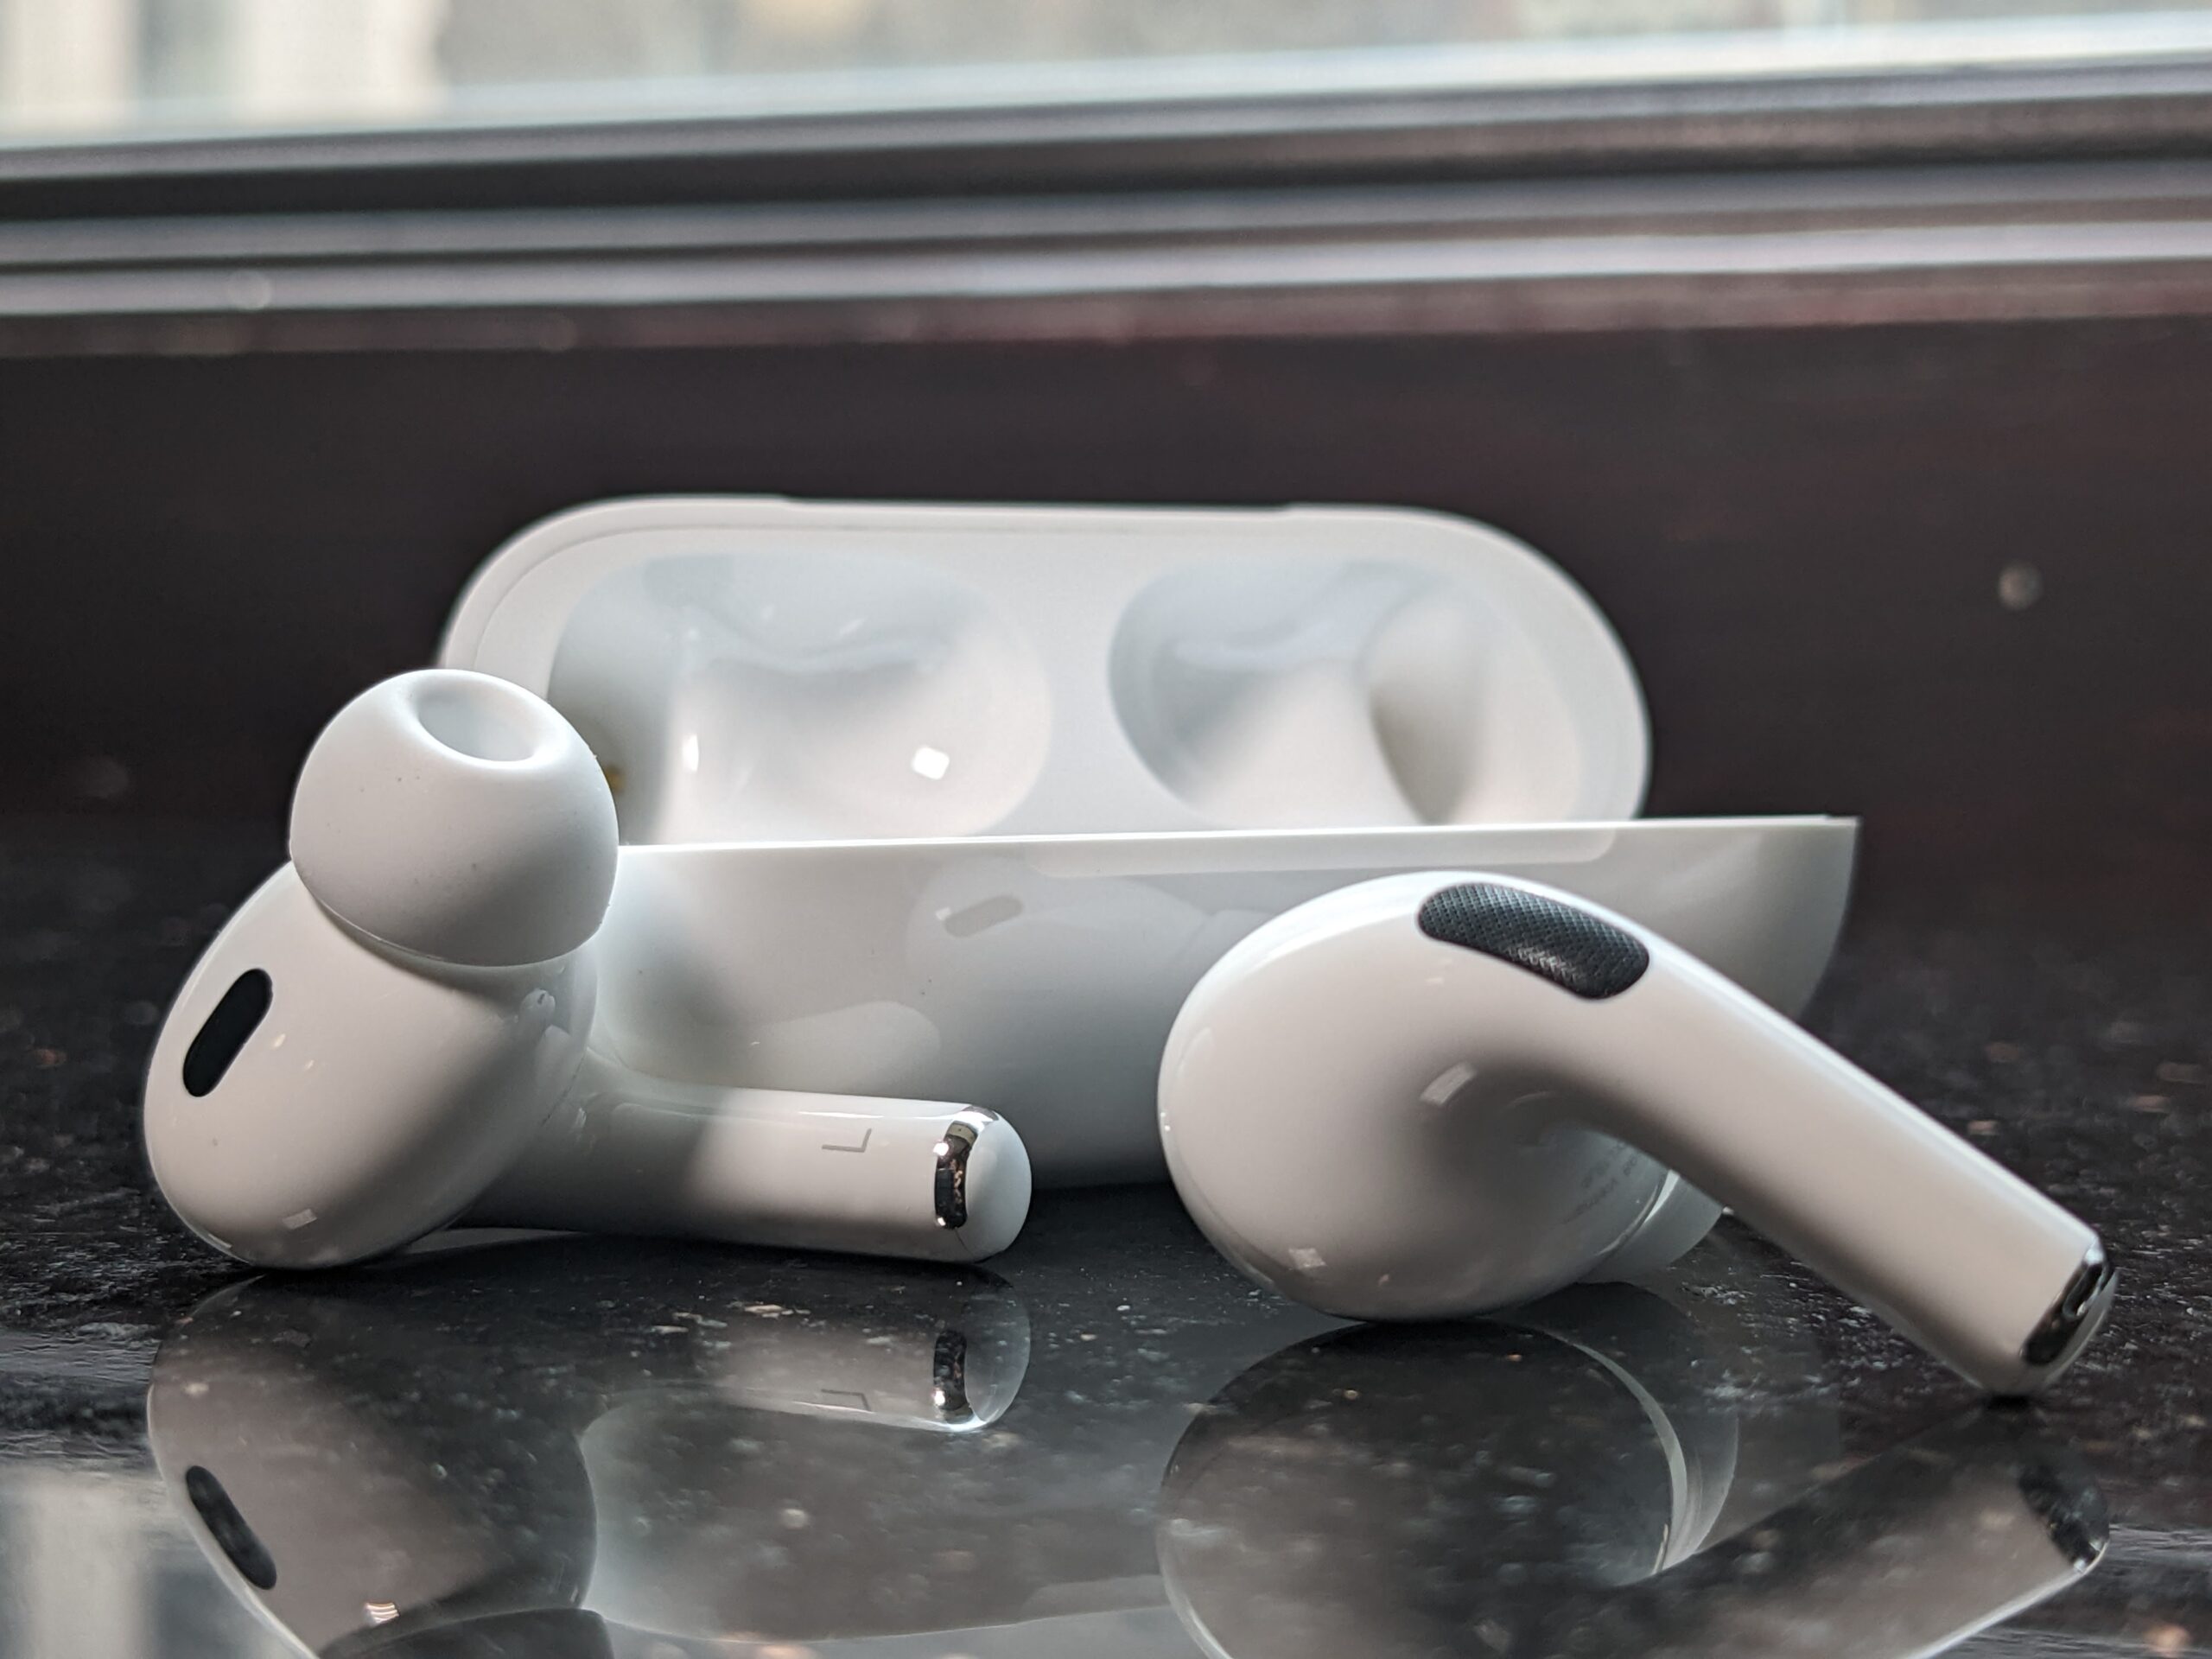 Apple, Airpods Pro 2nd Generation